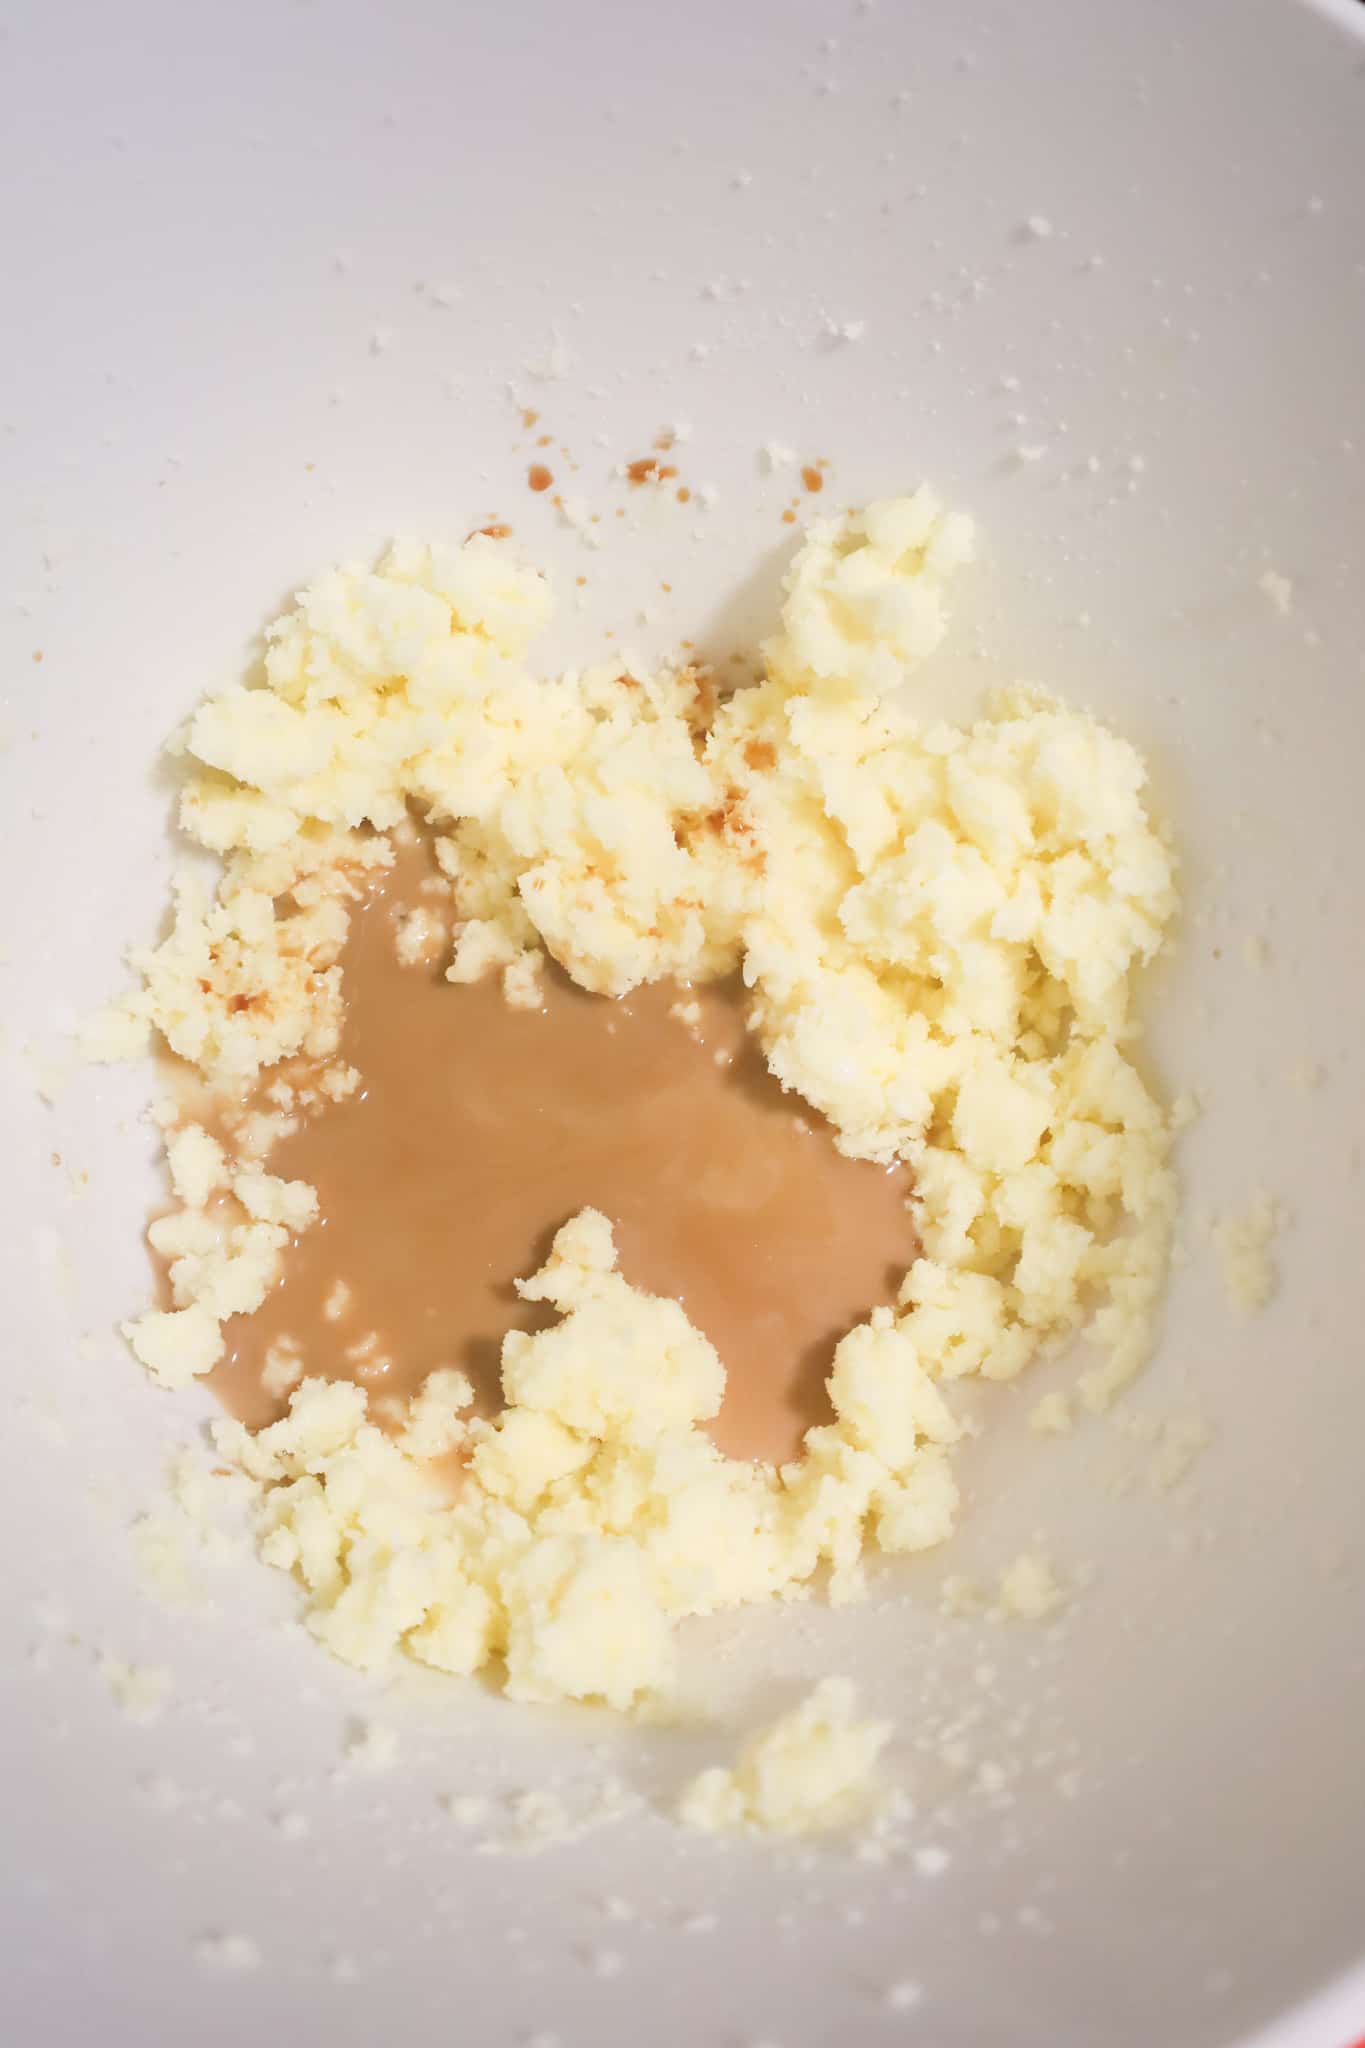 milk, vanilla extract, butter and sugar mixture in a mixing bowl